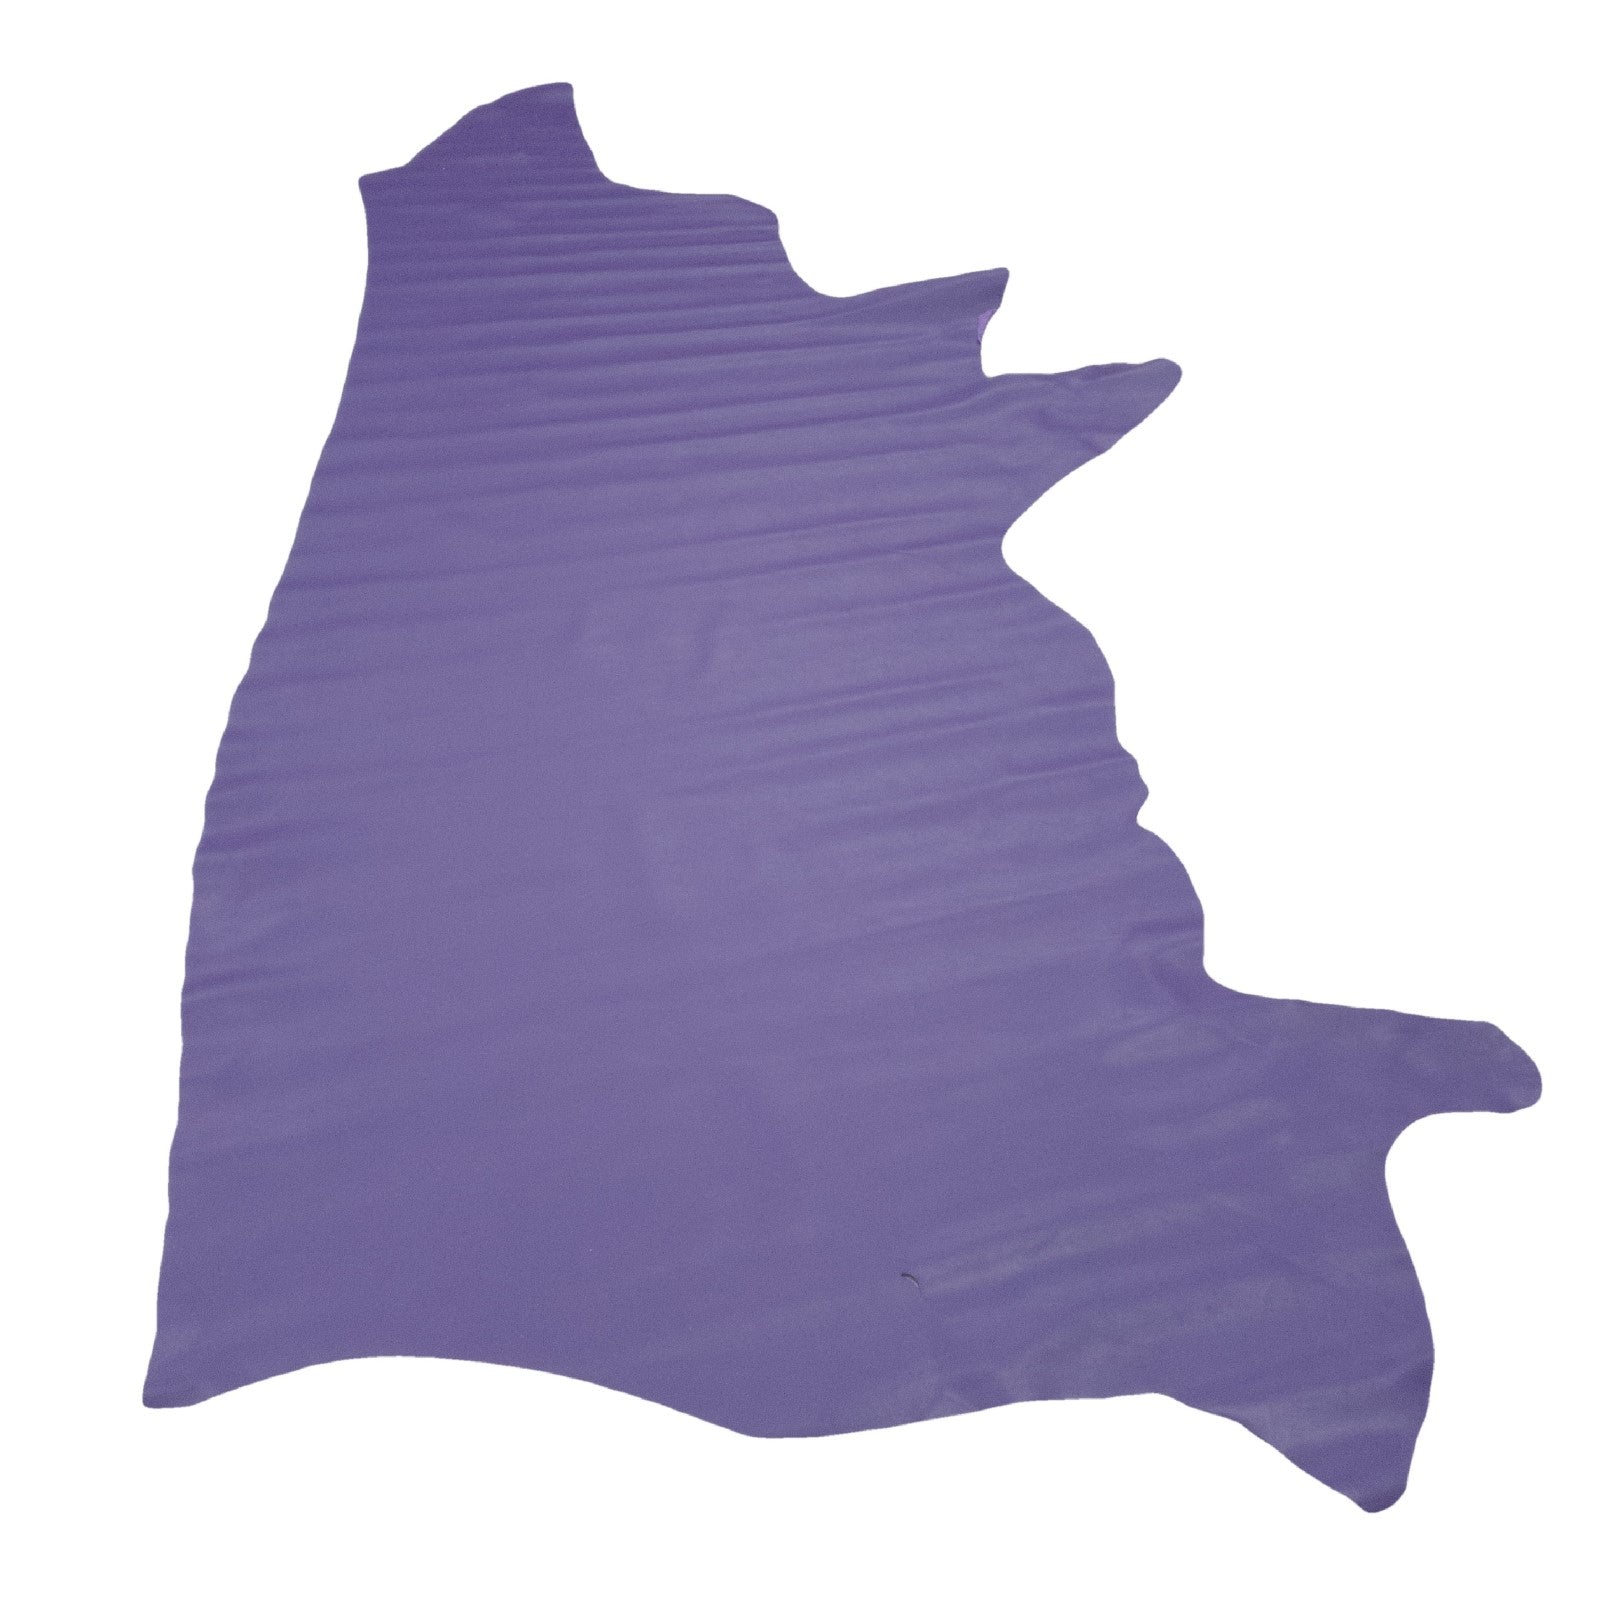 Kings Poppin' Purple, 3-3.5 oz Cow Hides, Starting Lineup, Side / 18-20 Sq Ft | The Leather Guy